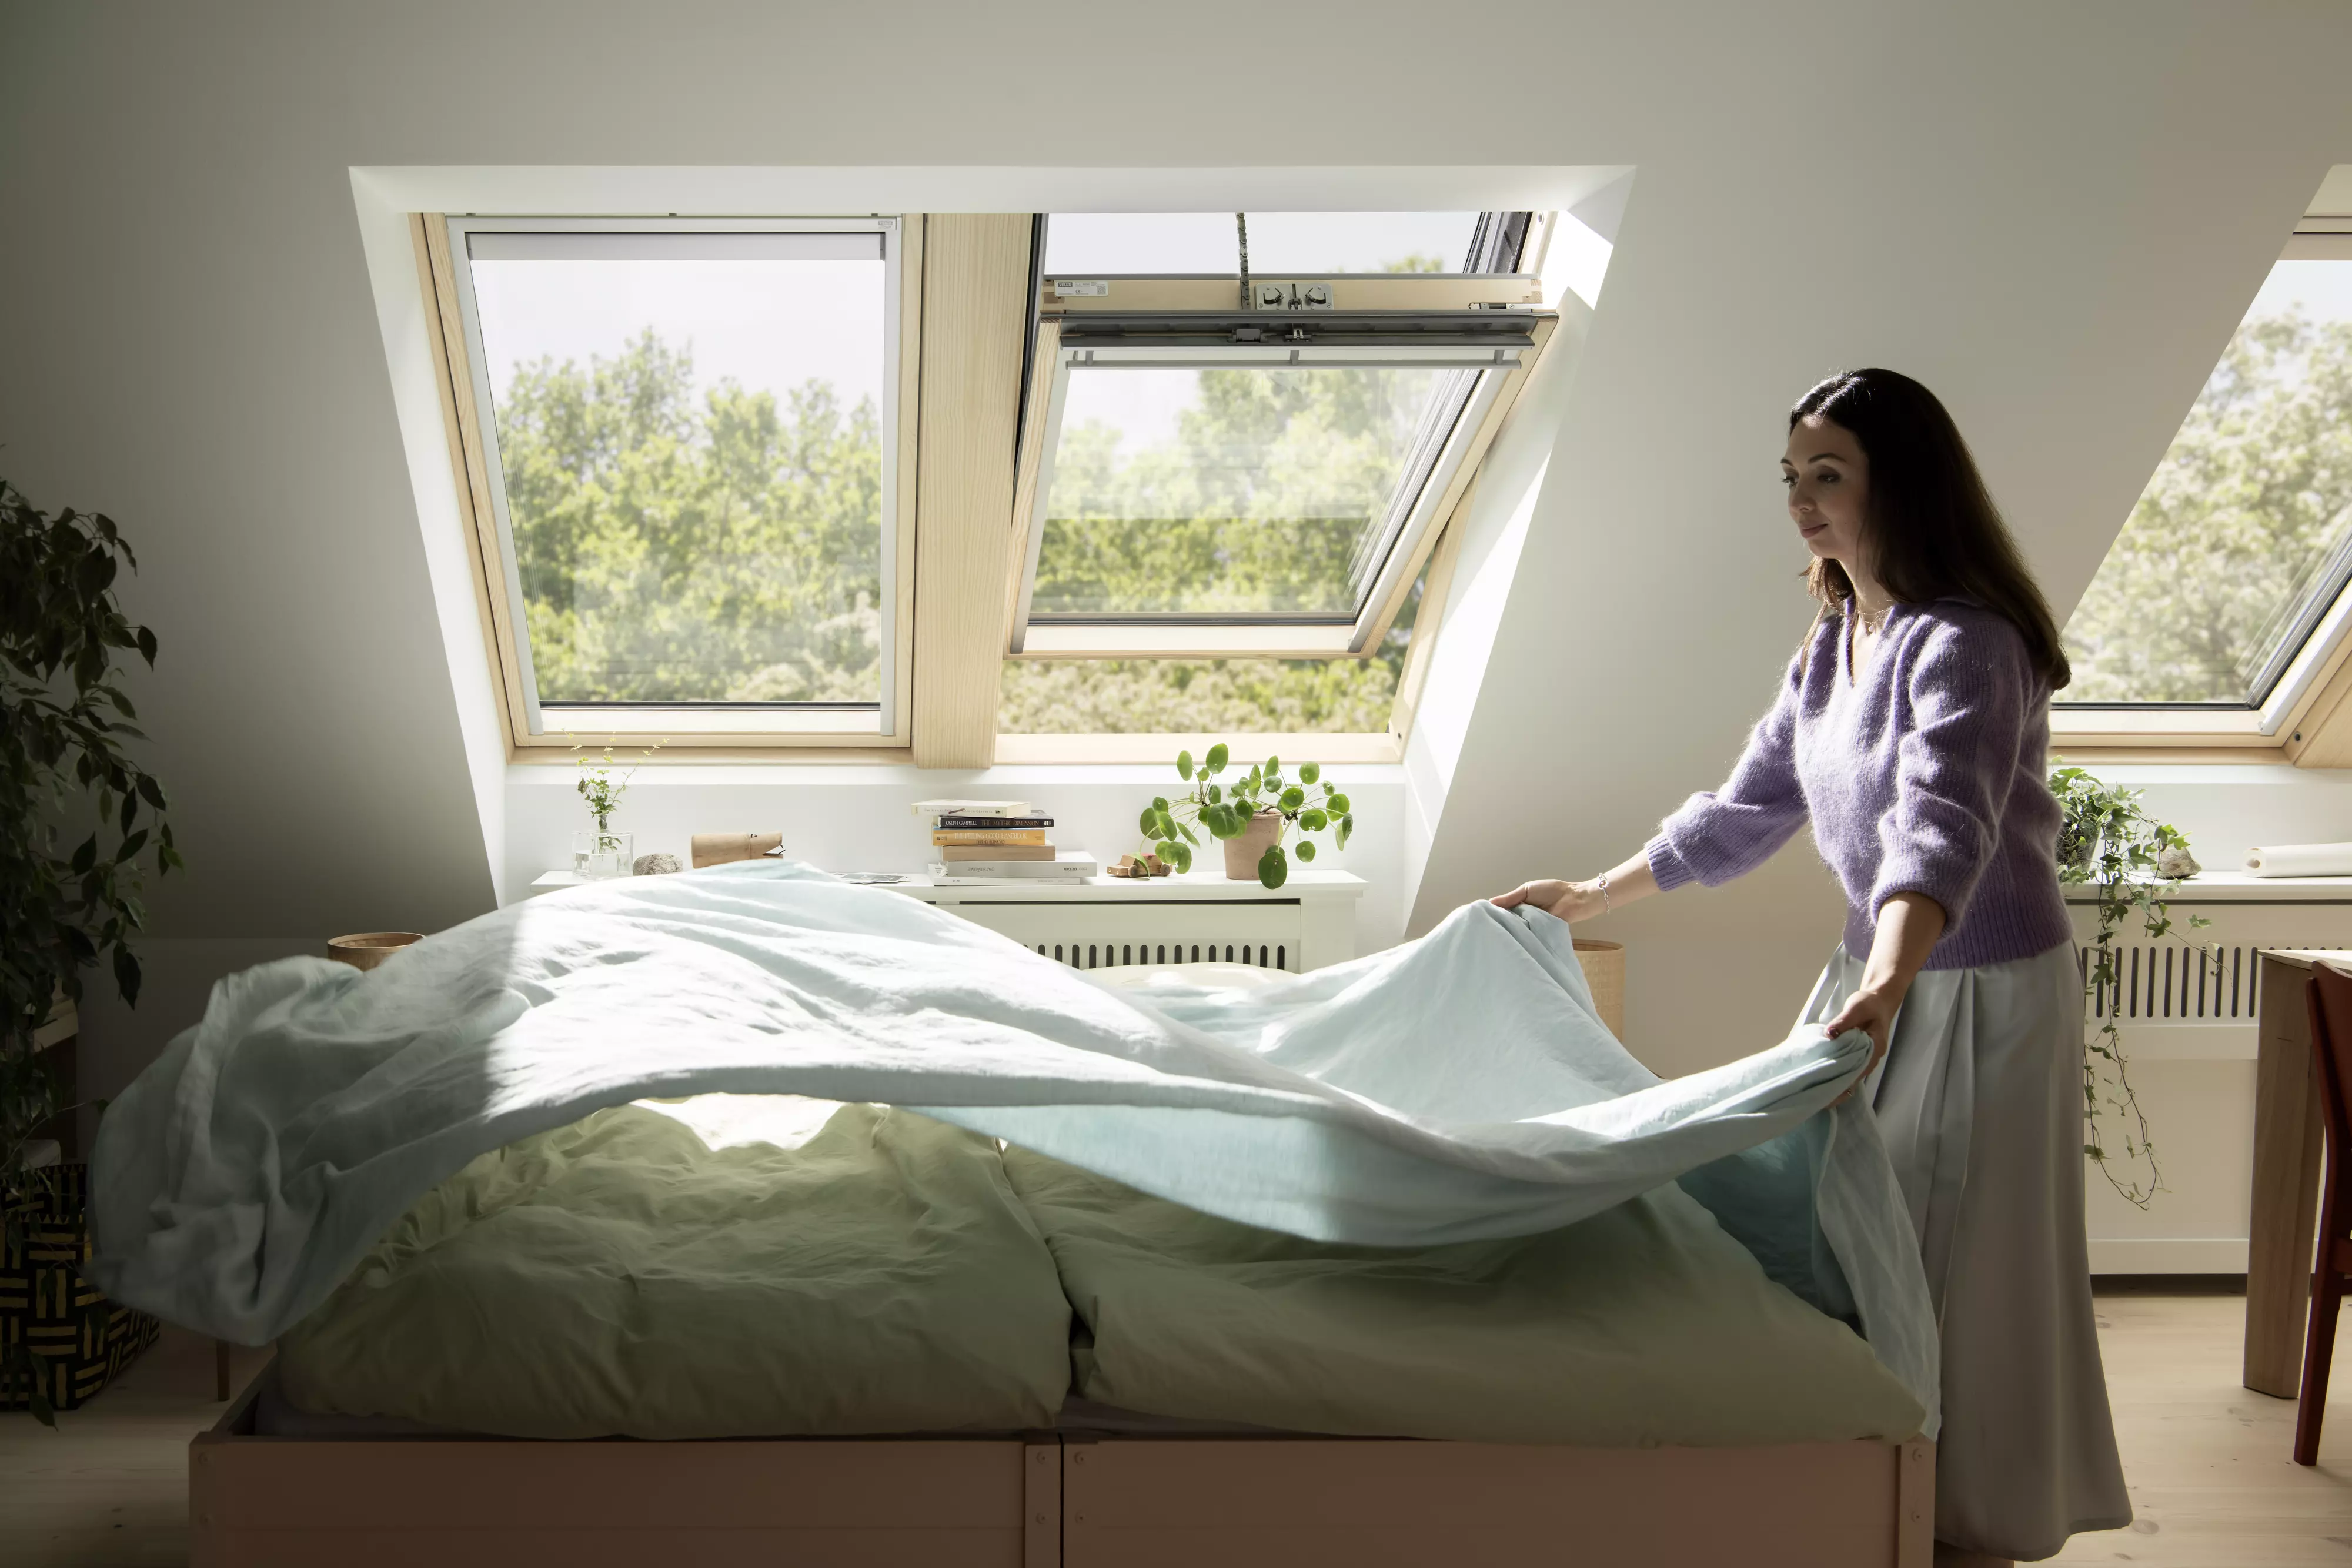 Bright loft bedroom with open VELUX skylights and person making the bed.